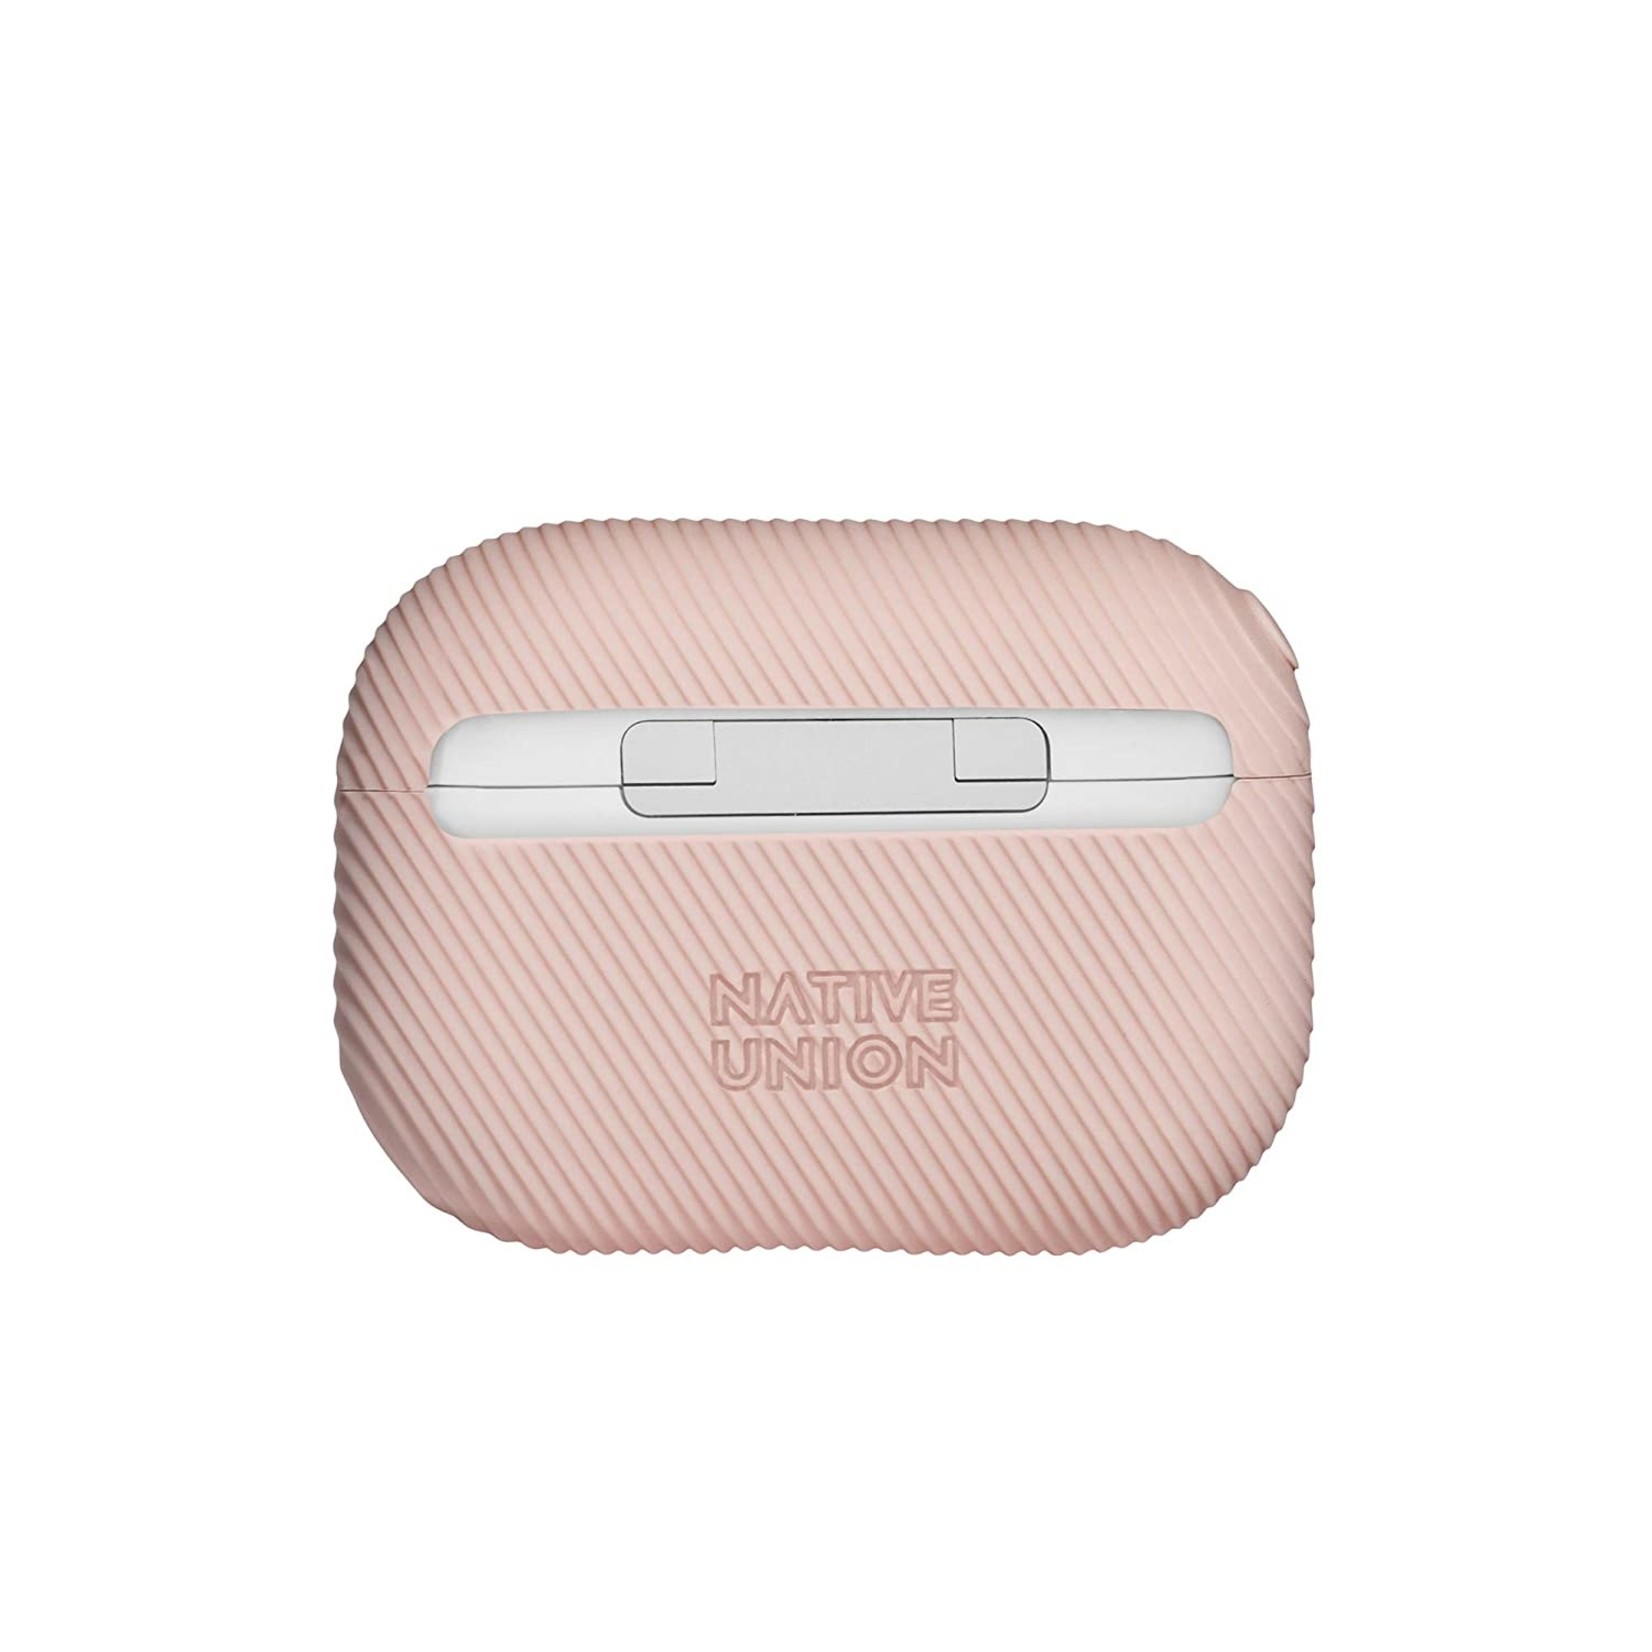 Native Union AirPods Pro Curve Case - Pink